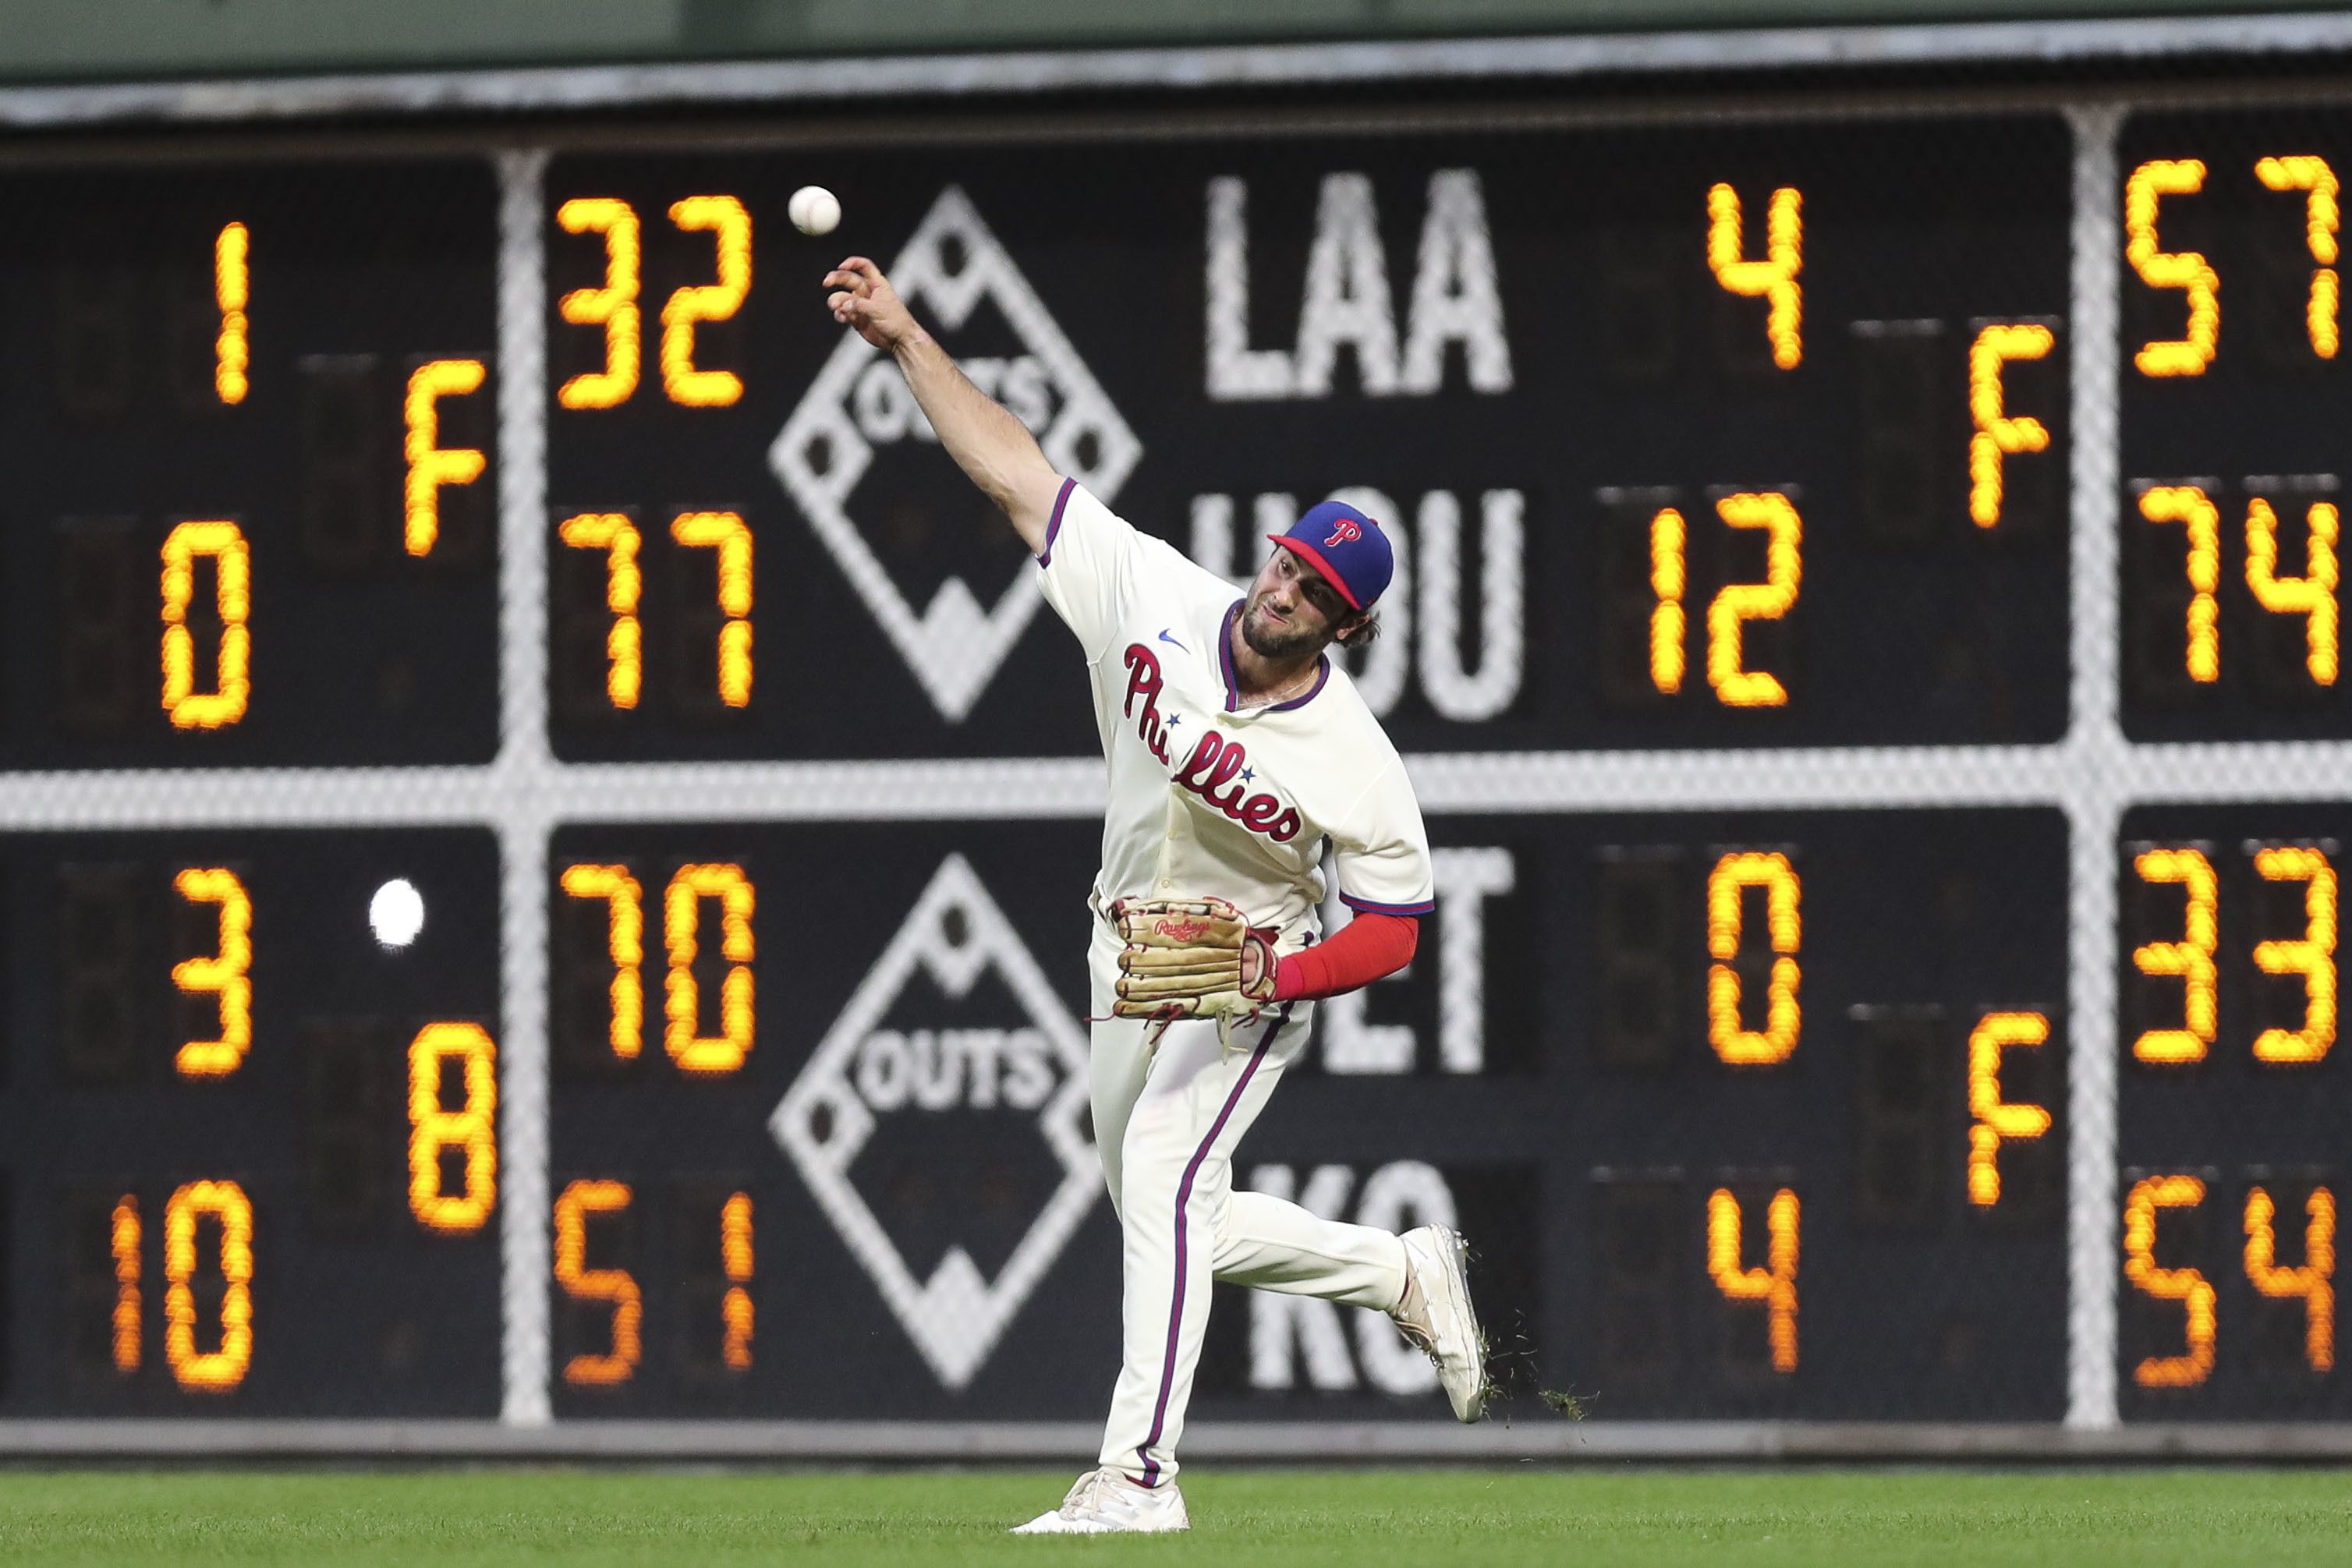 1992 Week: The Phillies' very decent uniforms and logo  Phillies Nation -  Your source for Philadelphia Phillies news, opinion, history, rumors,  events, and other fun stuff.